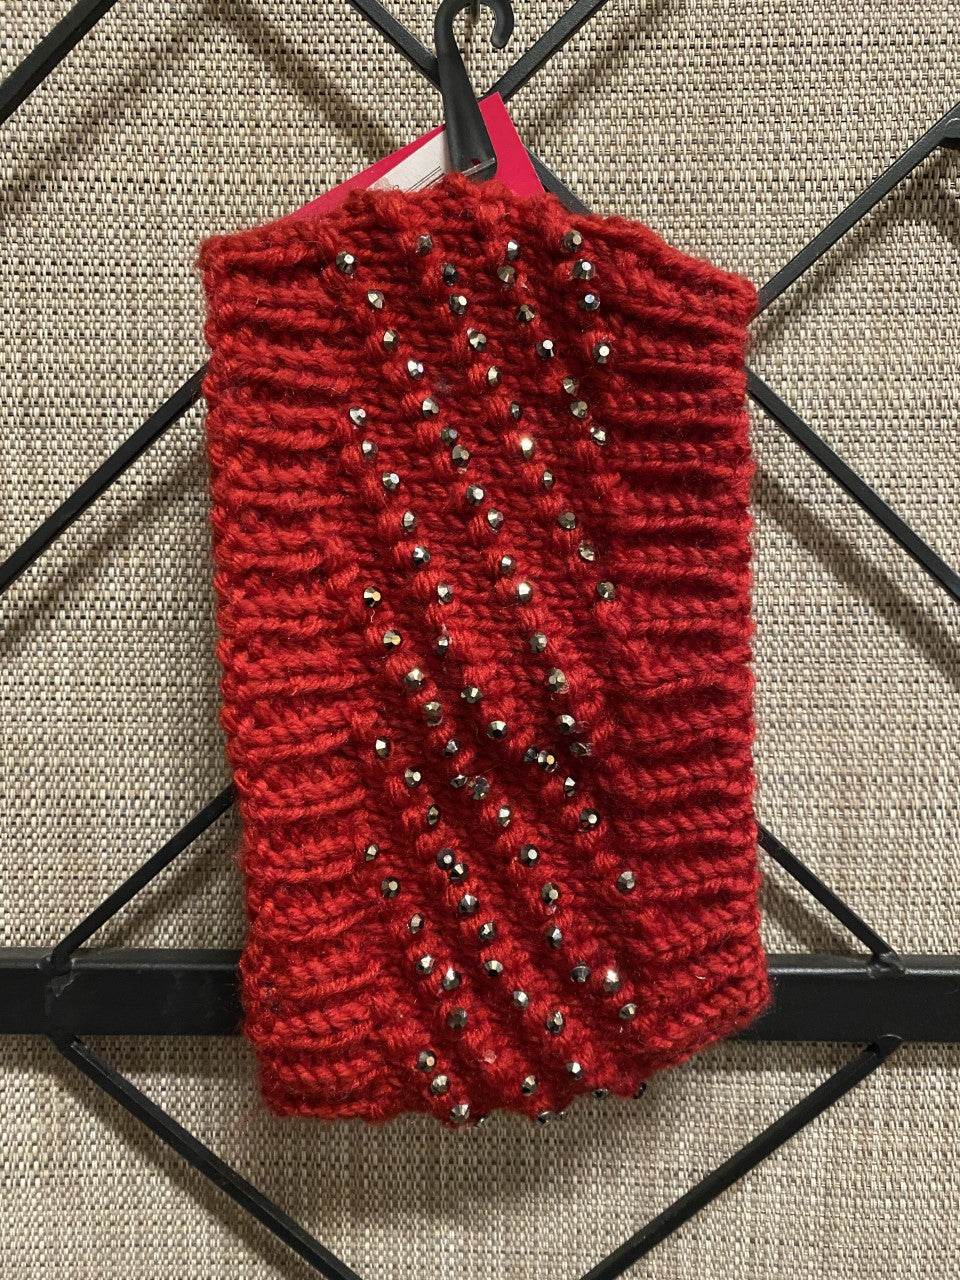 Head Warmer Knit Red With/Jewels As Shown #26-12